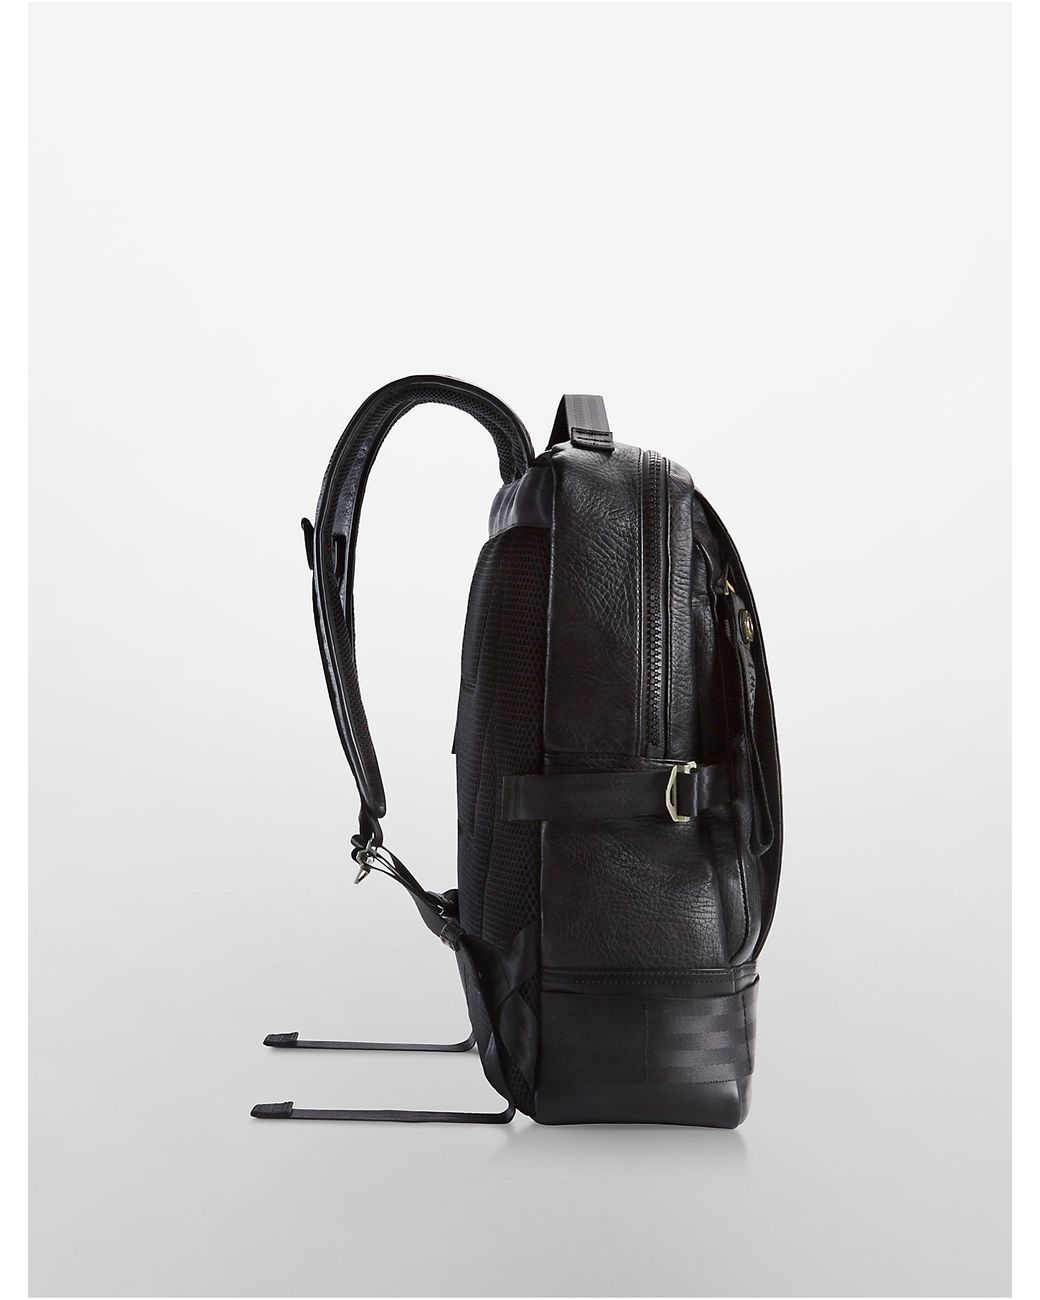 droogte Loodgieter sarcoom Calvin Klein Jeans Pilot Leather Backpack in Black | Lyst